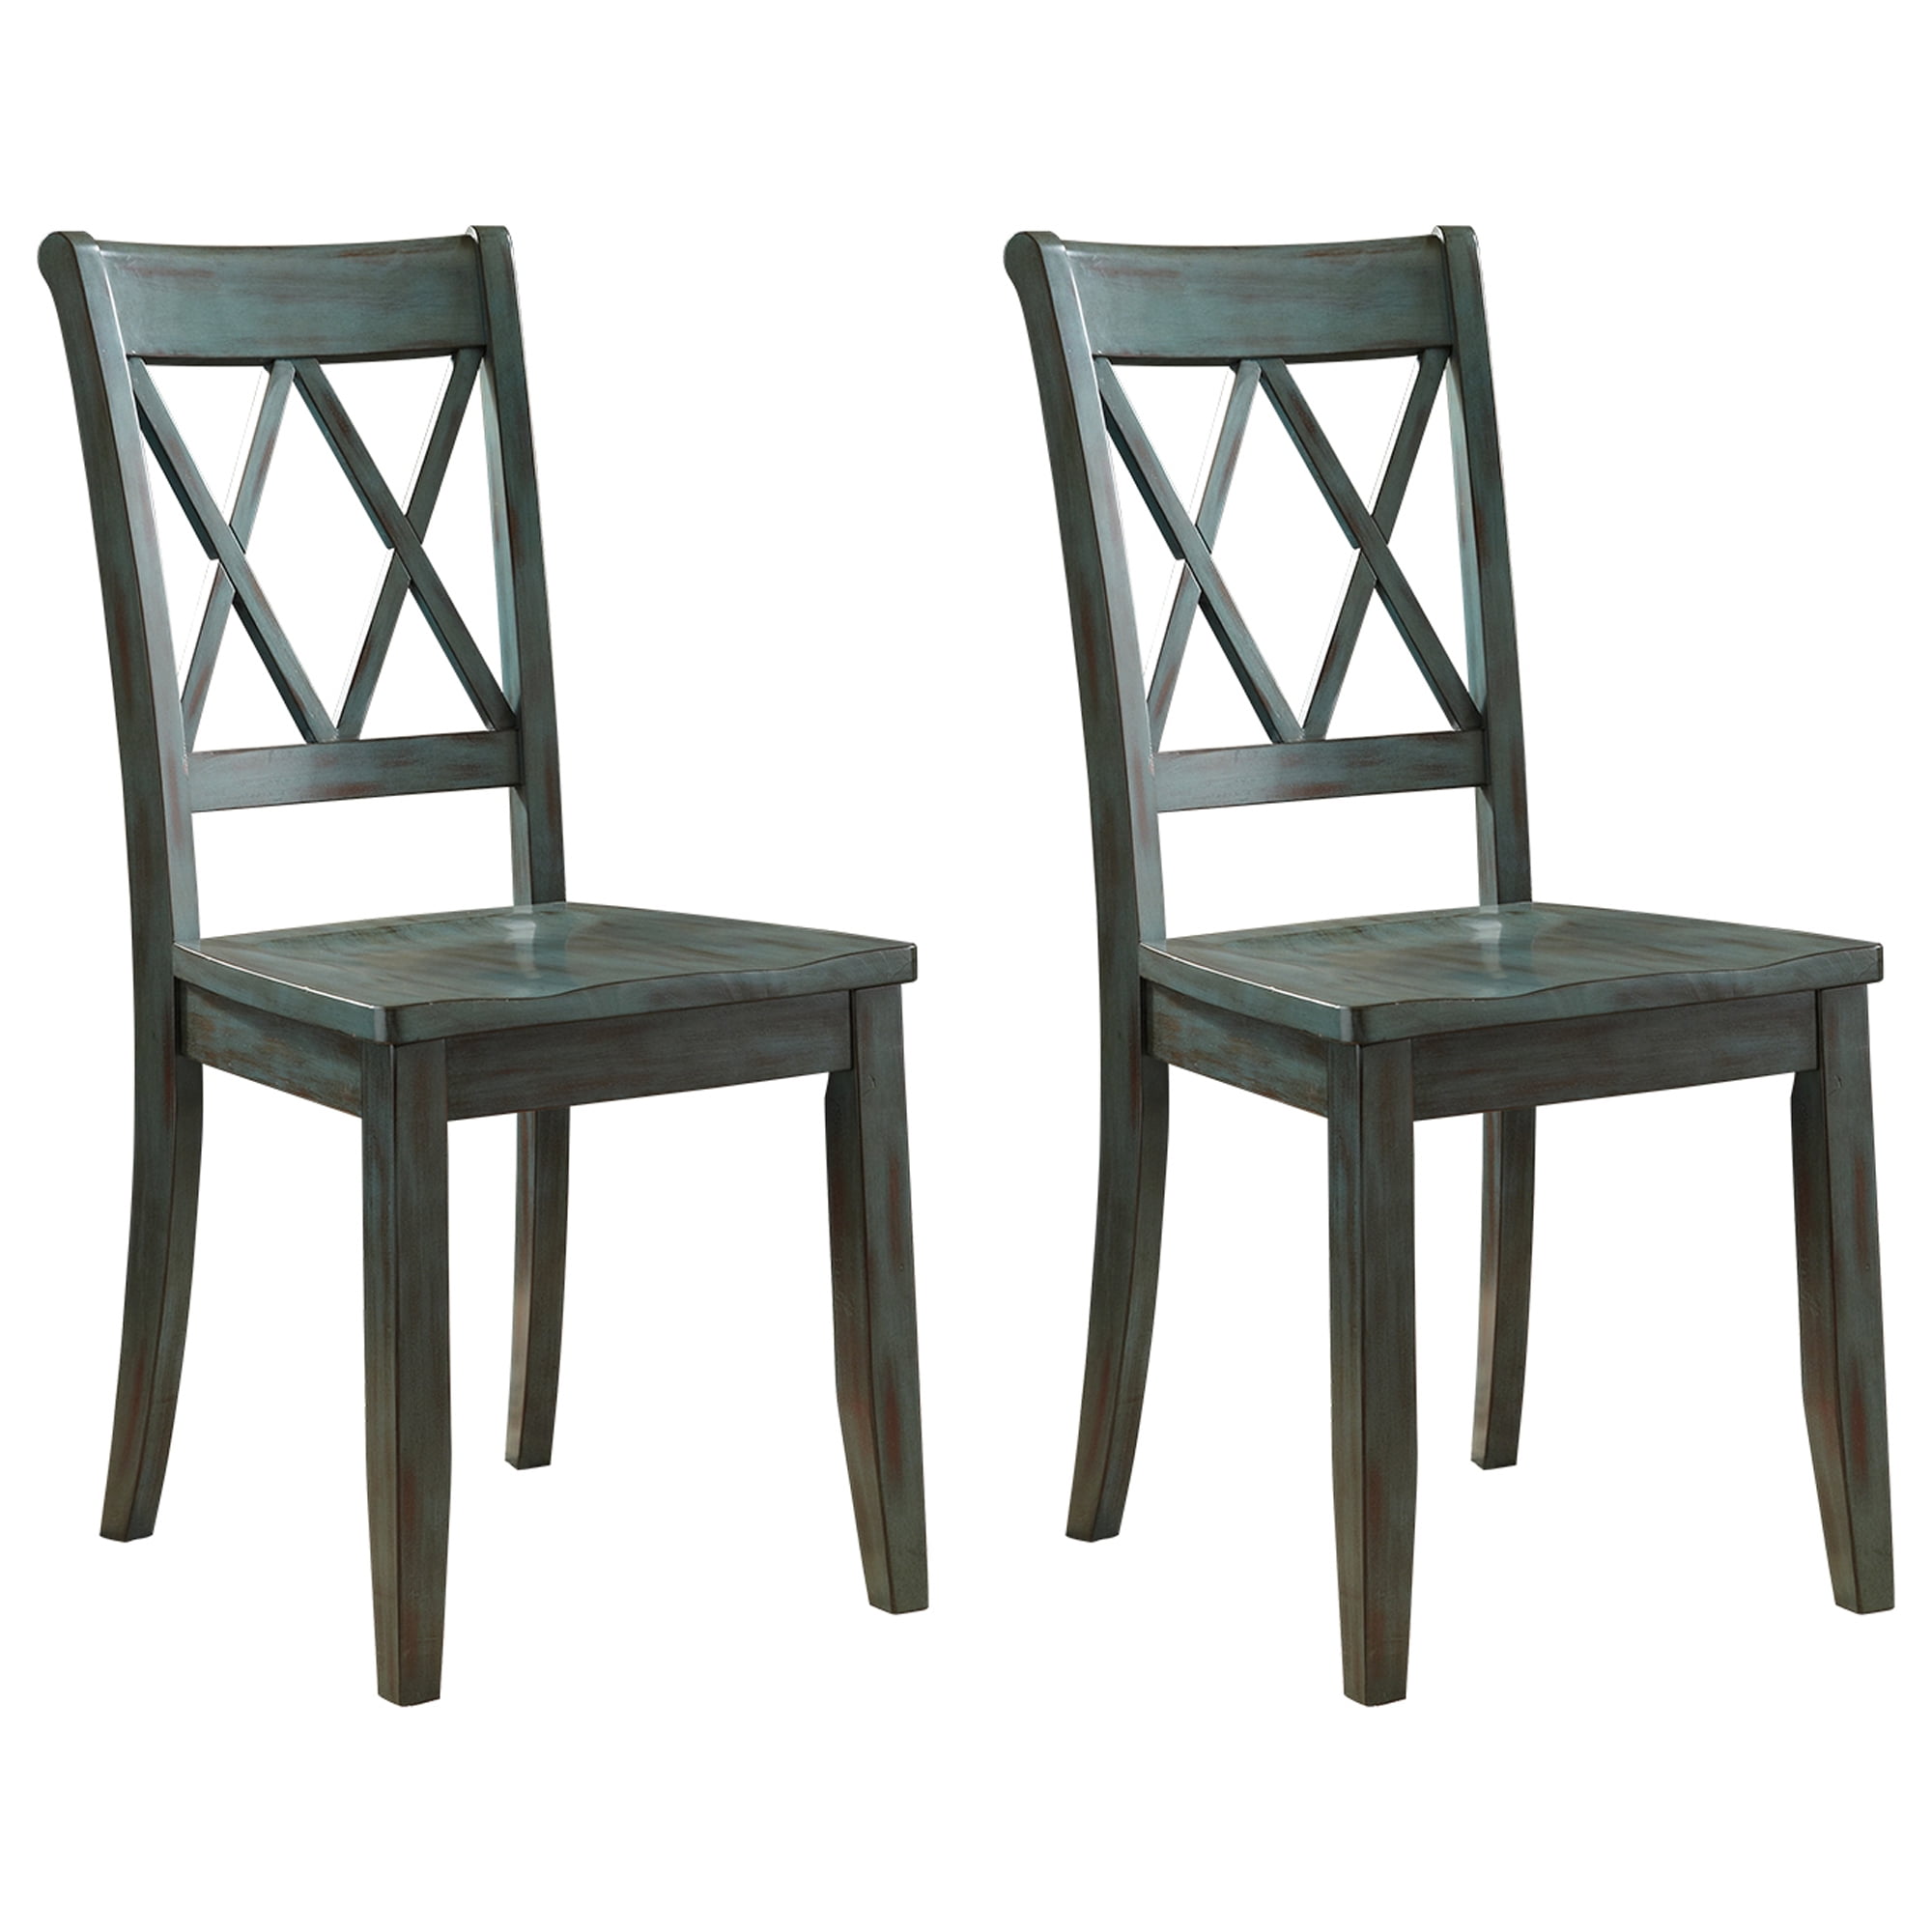 Signature Design by Ashley Casual Mestler Dining Room Side Chair - Set